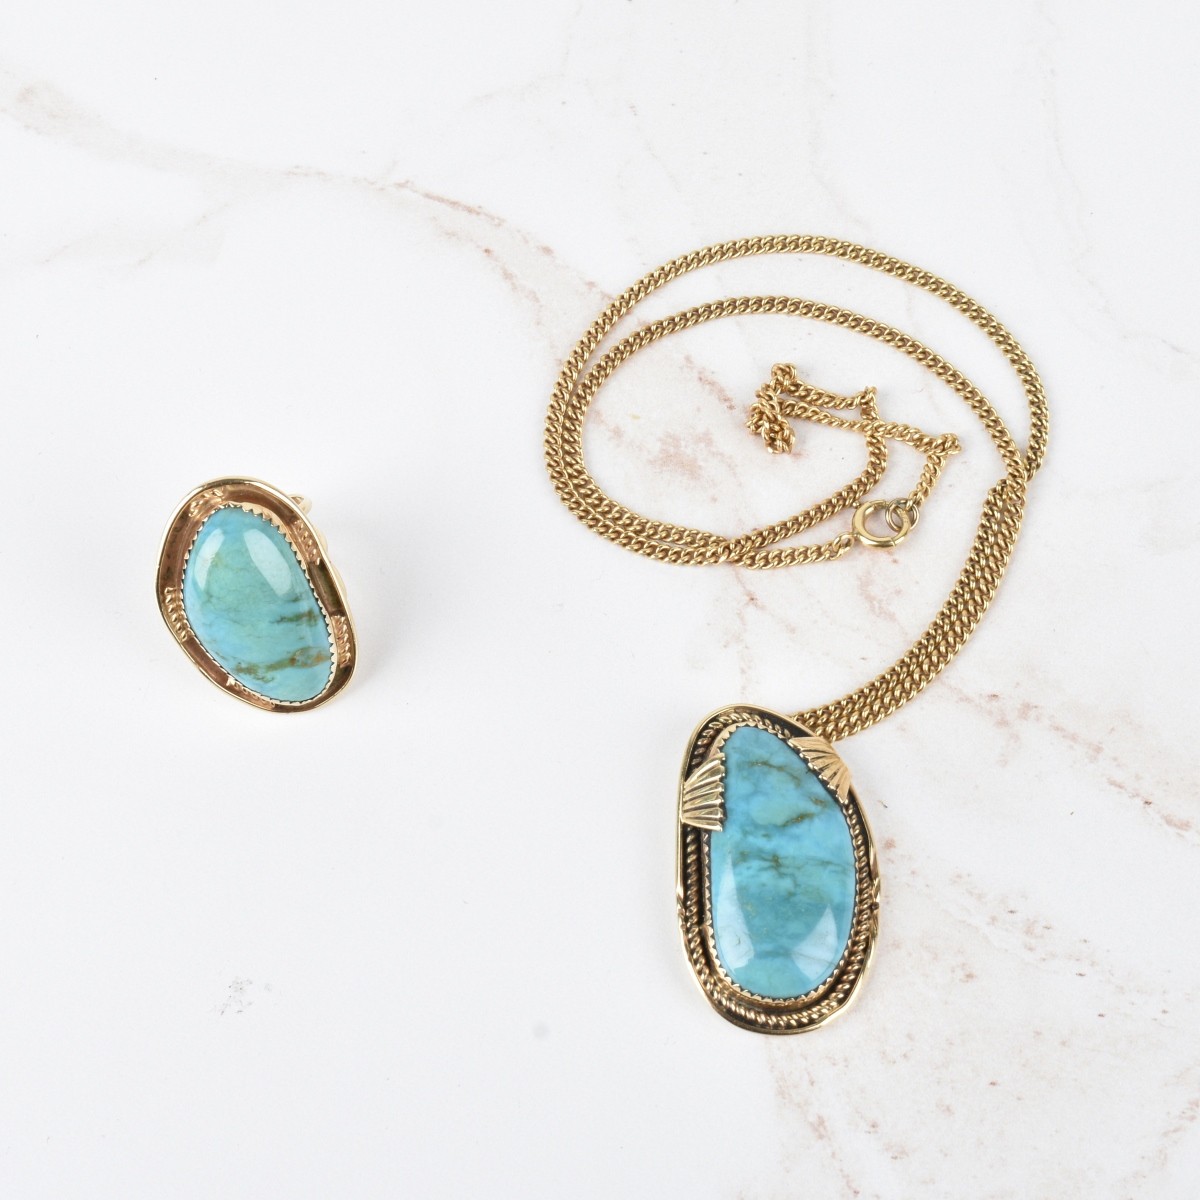 Turquoise and 14K Ring and Necklace